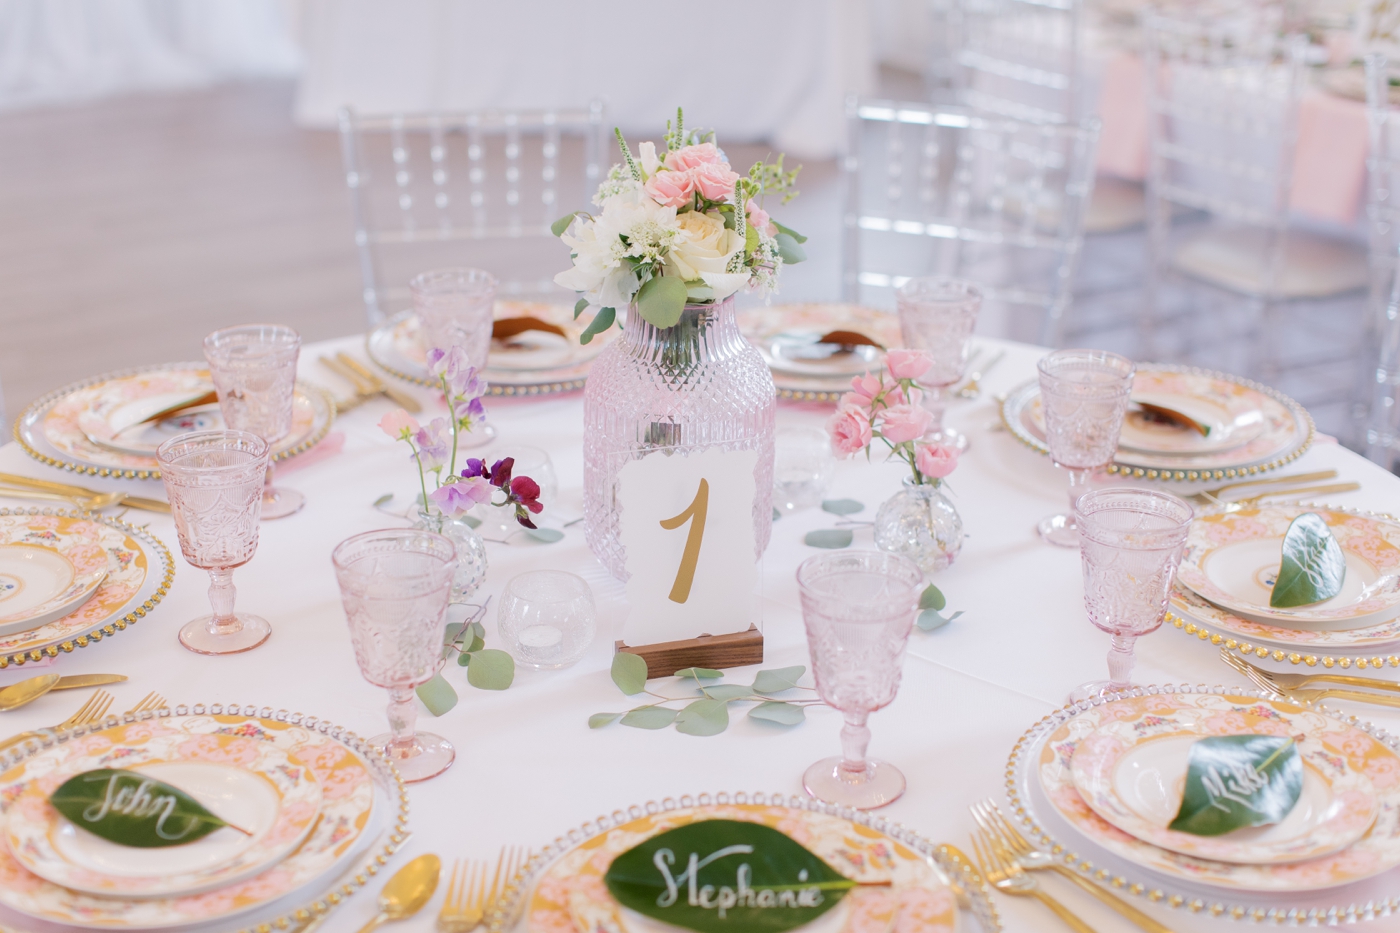 Mismatched china for a romantic wedding in Fairmont, West Virginia